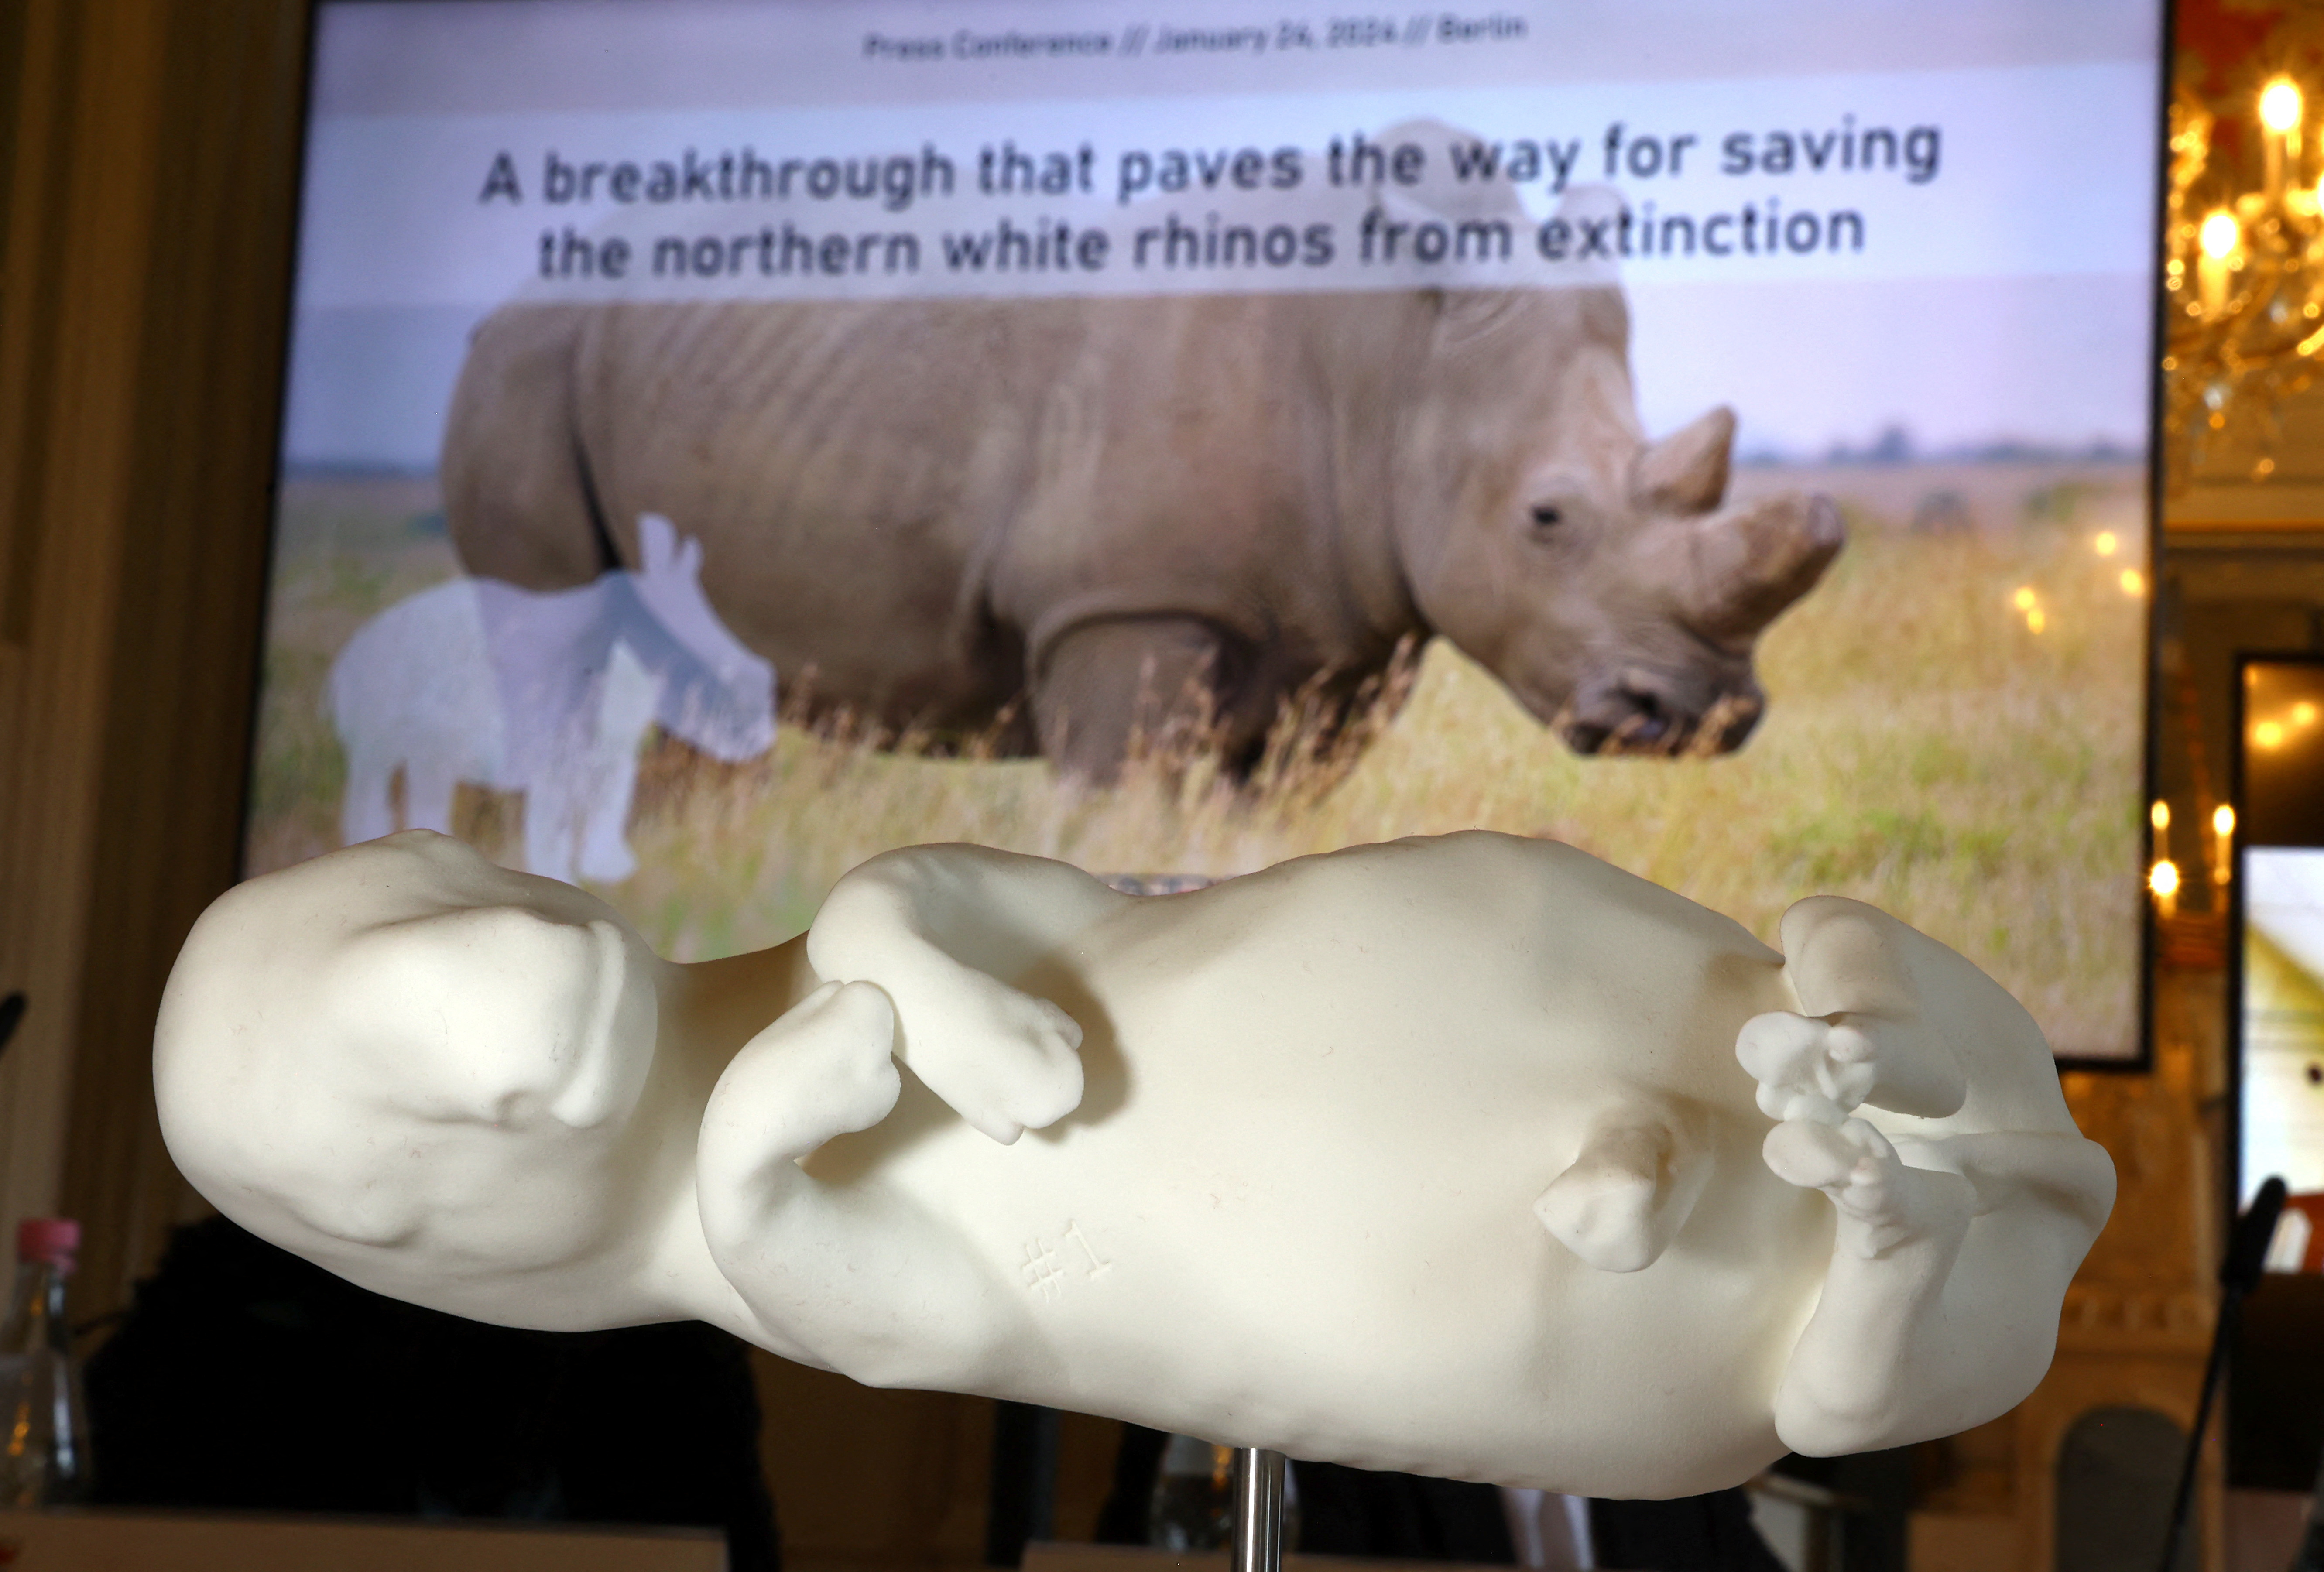 Africa: New Embryos, Surrogate Mothers Added to Northern White